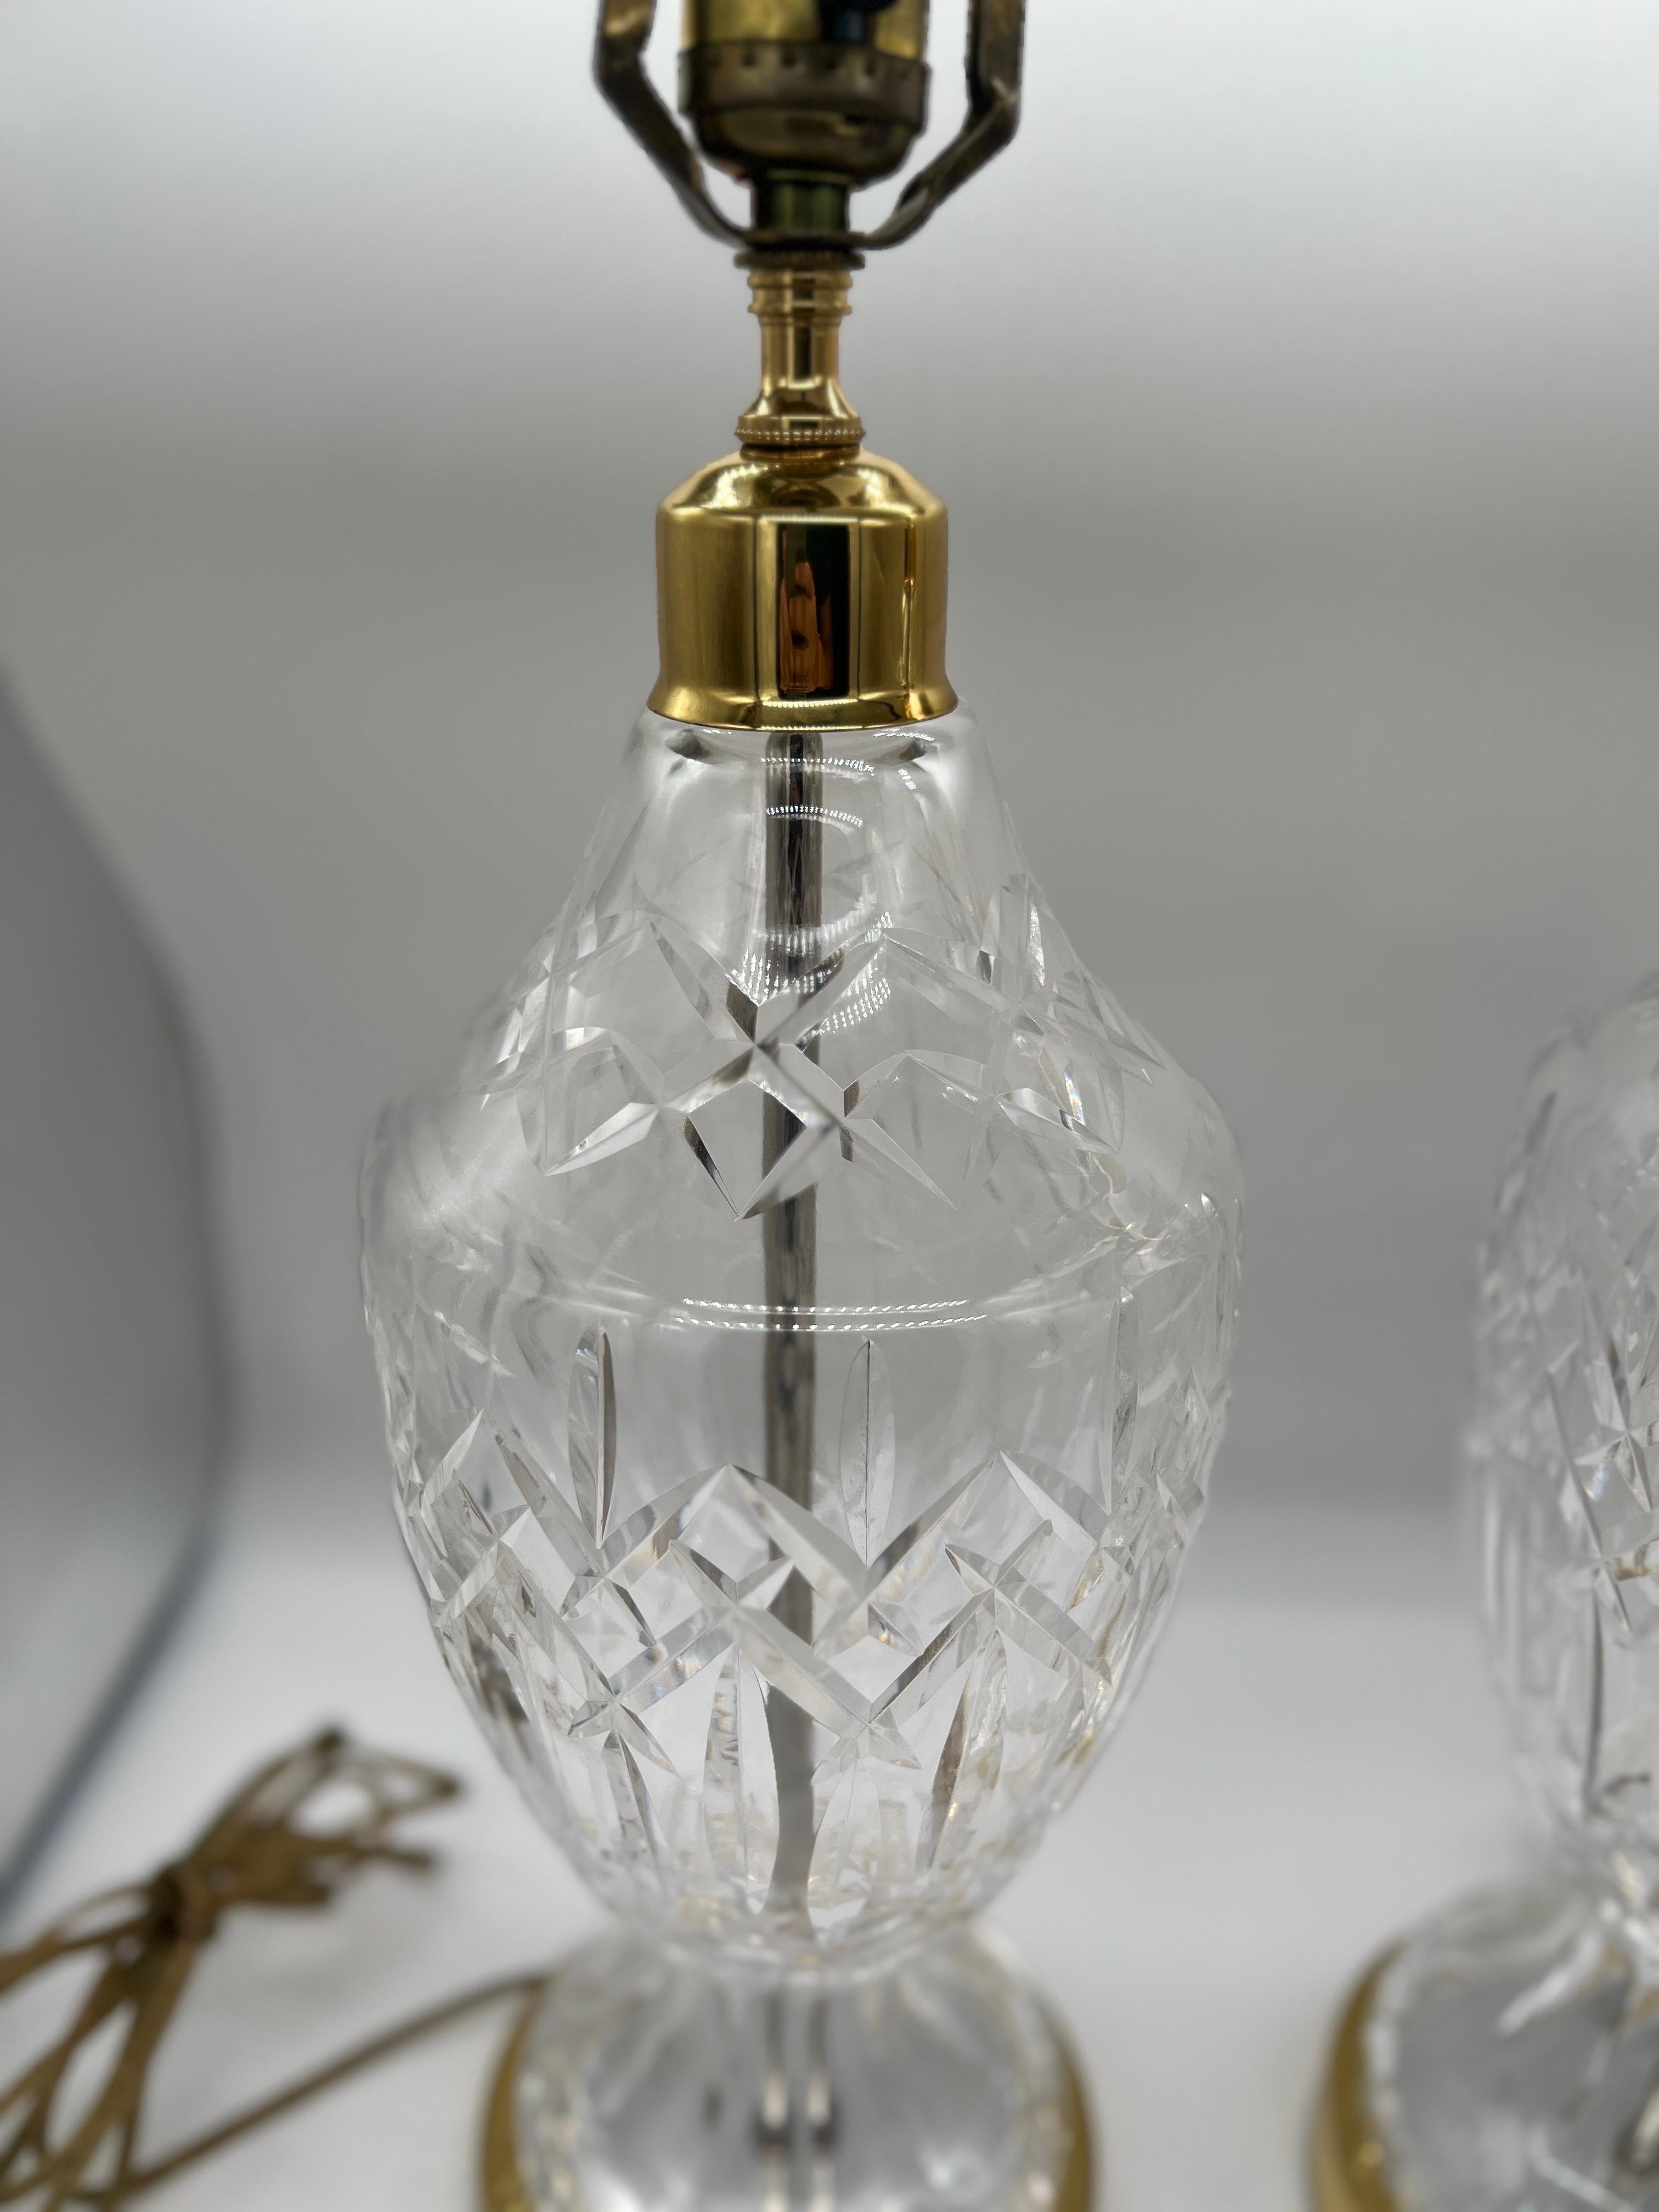 waterford crystal lamp value